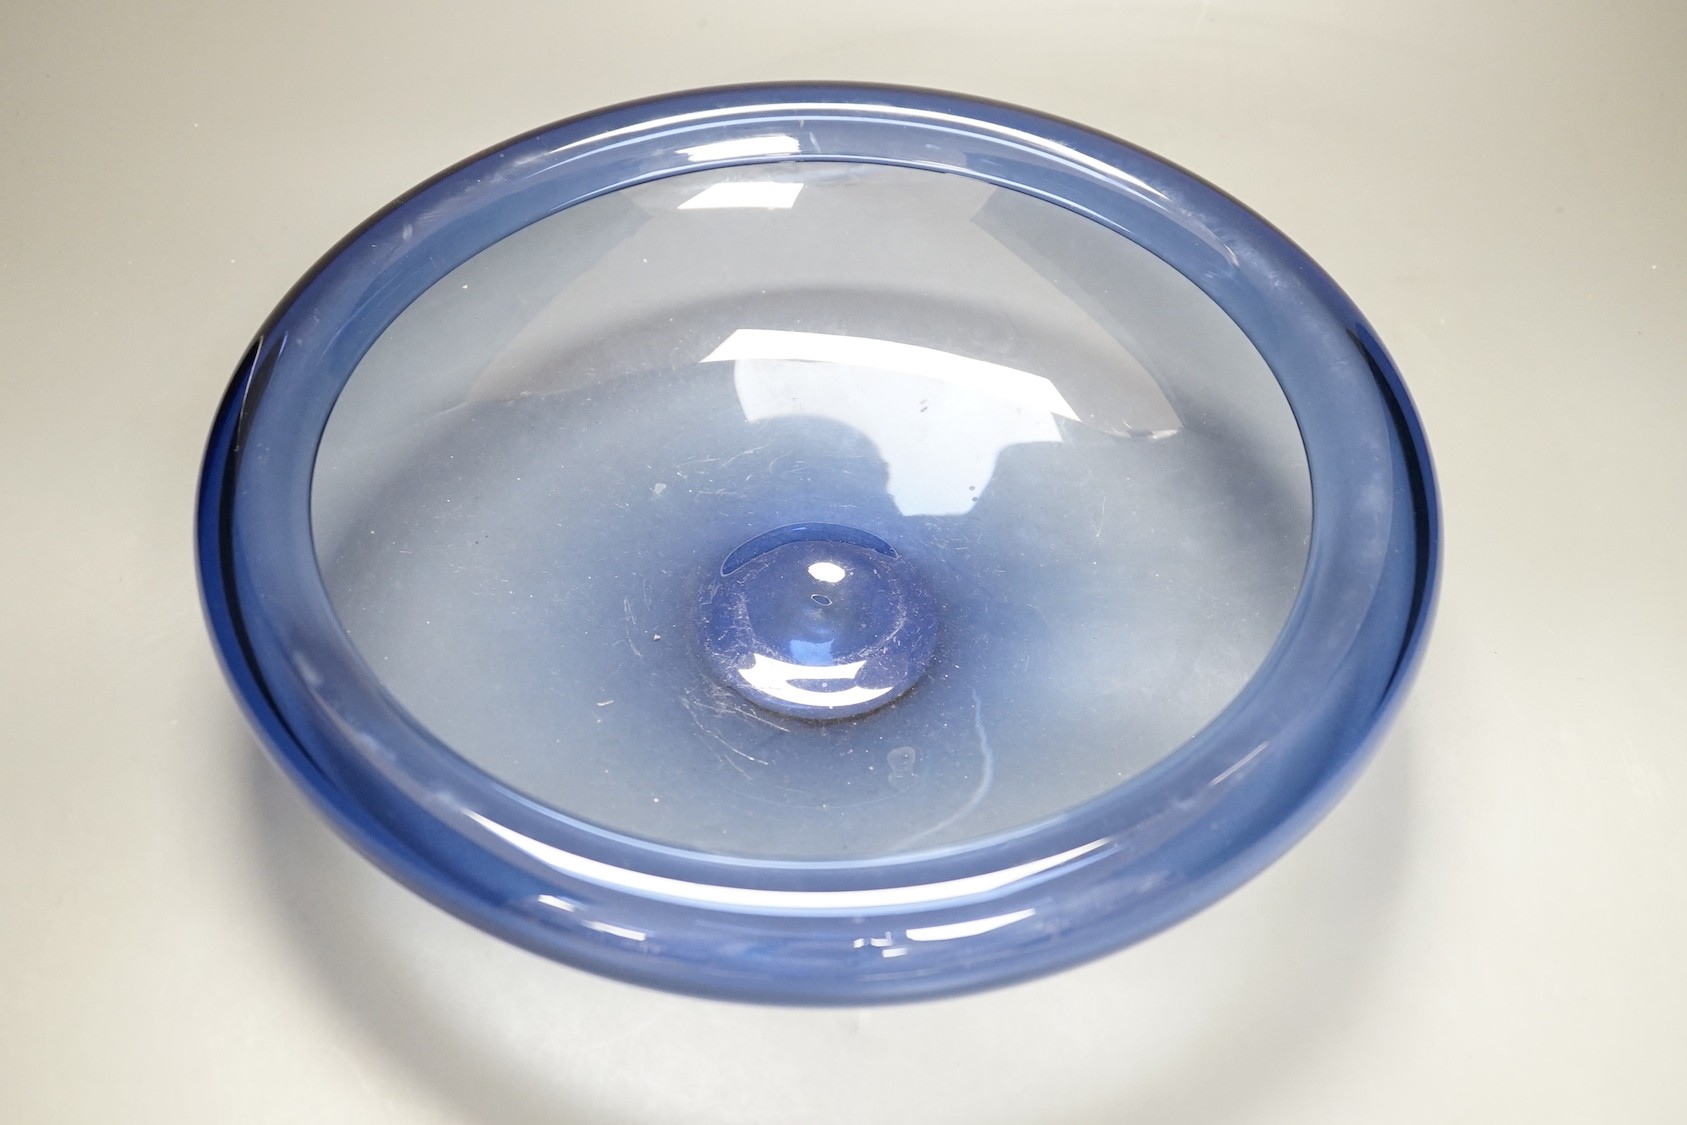 A Holmegaard blue glass bowl, signed and Numbered 17793, 34.5cm